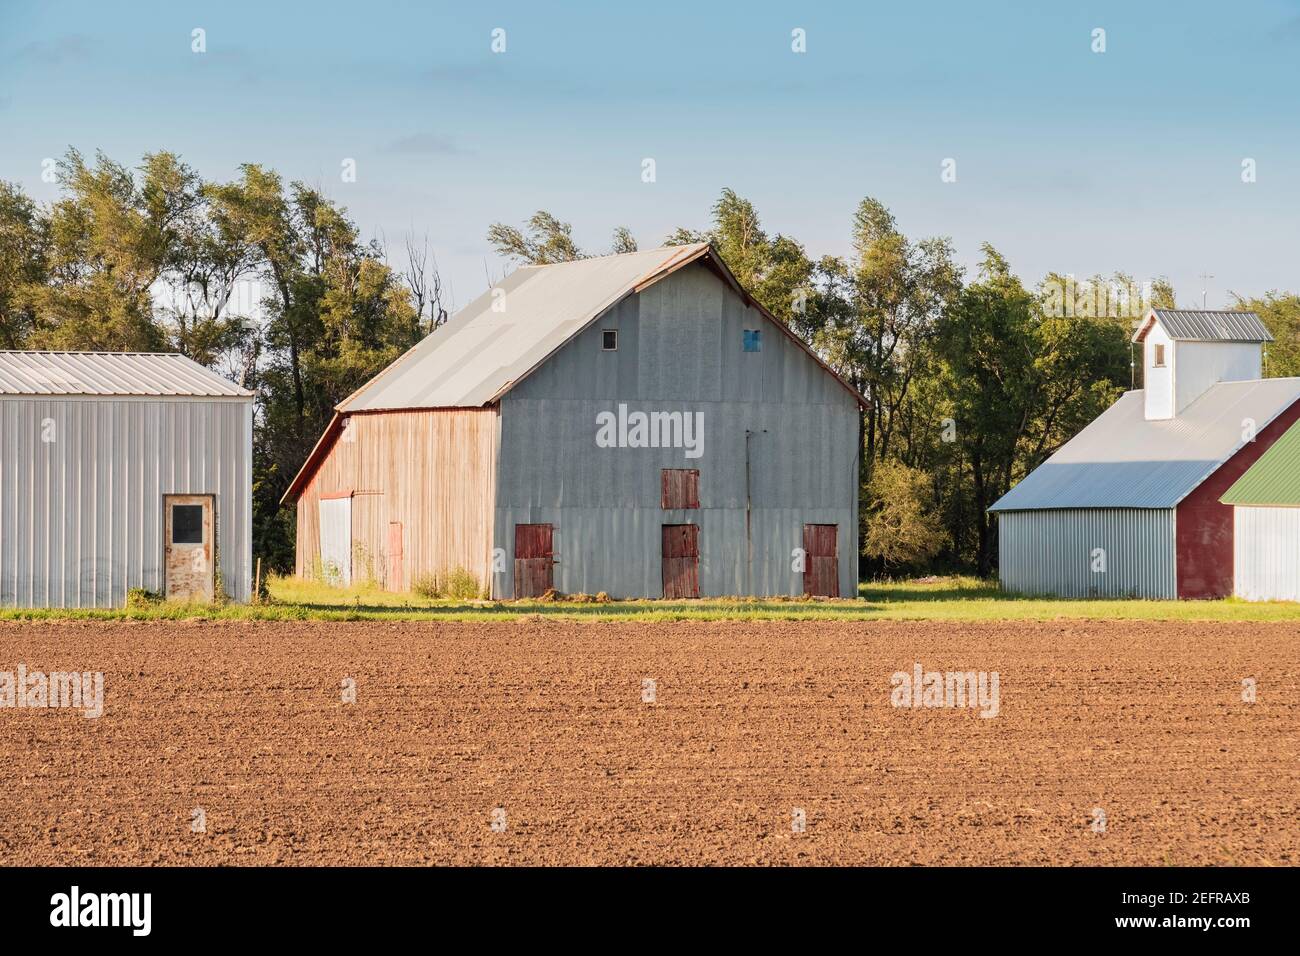 A farmyard with a metal and wood barn, garage and outbuilding. Plowed field. Kansas, USA. Stock Photo